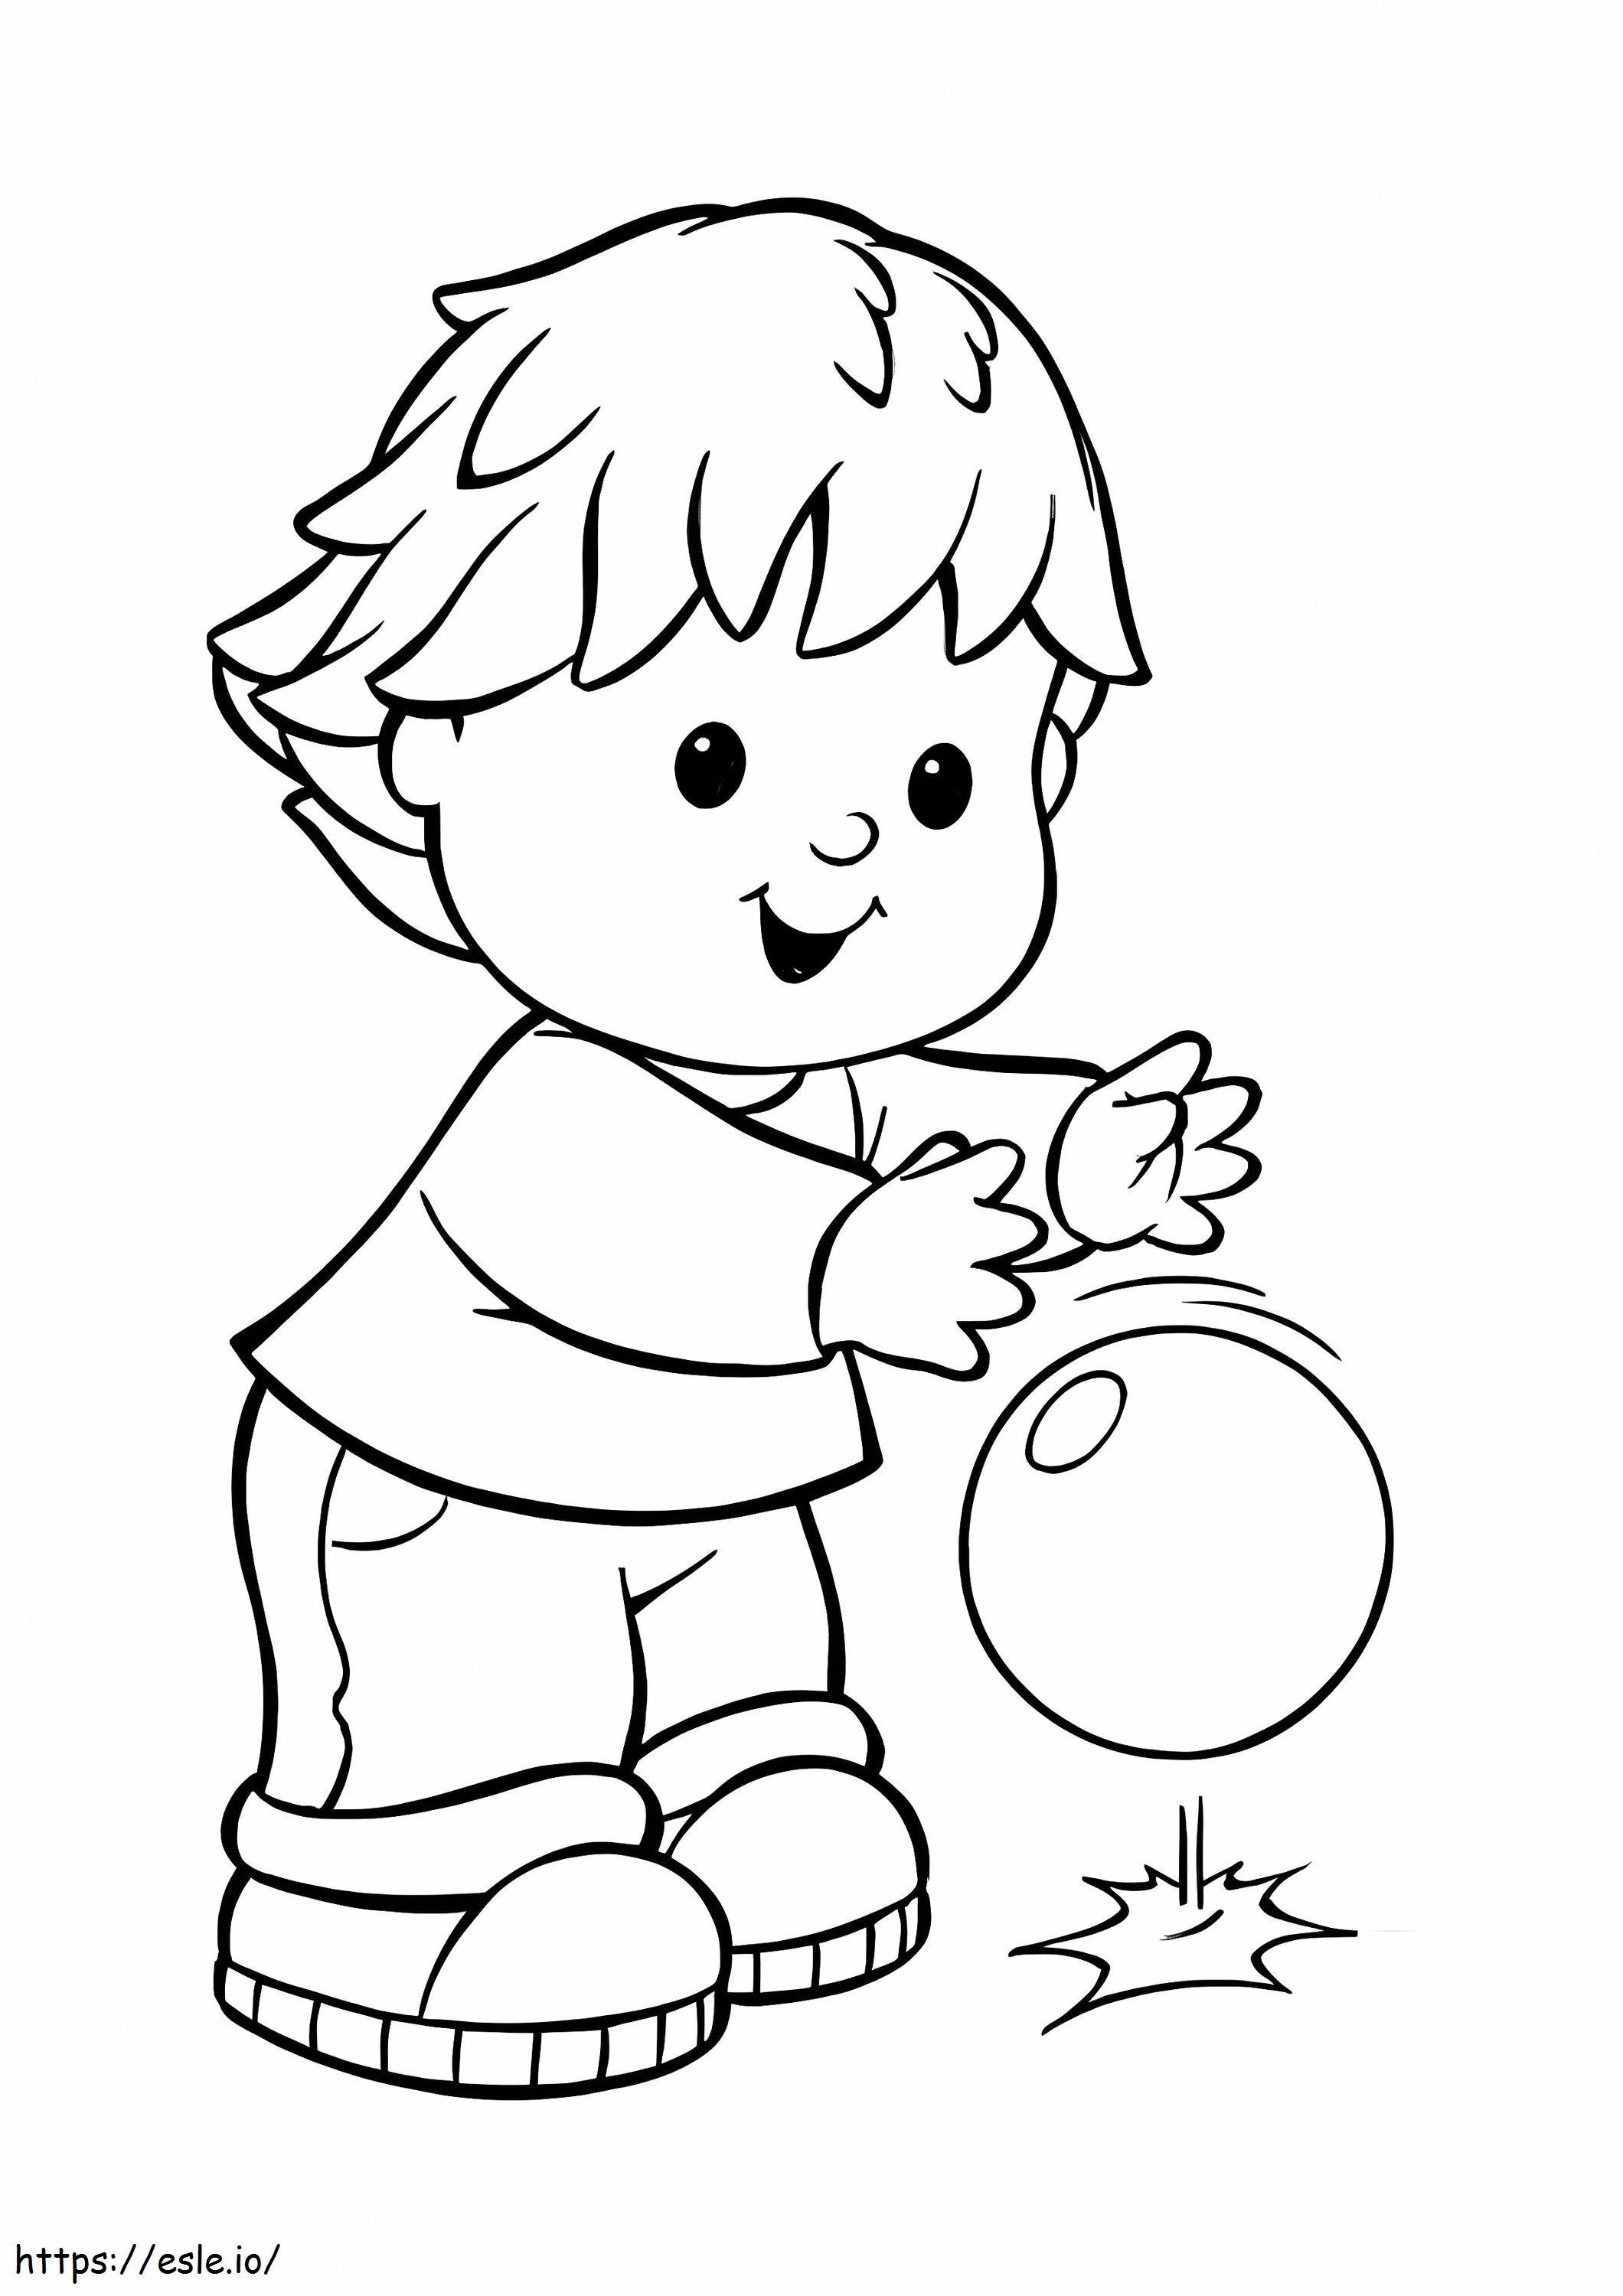 Boy Girl Play Football coloring page